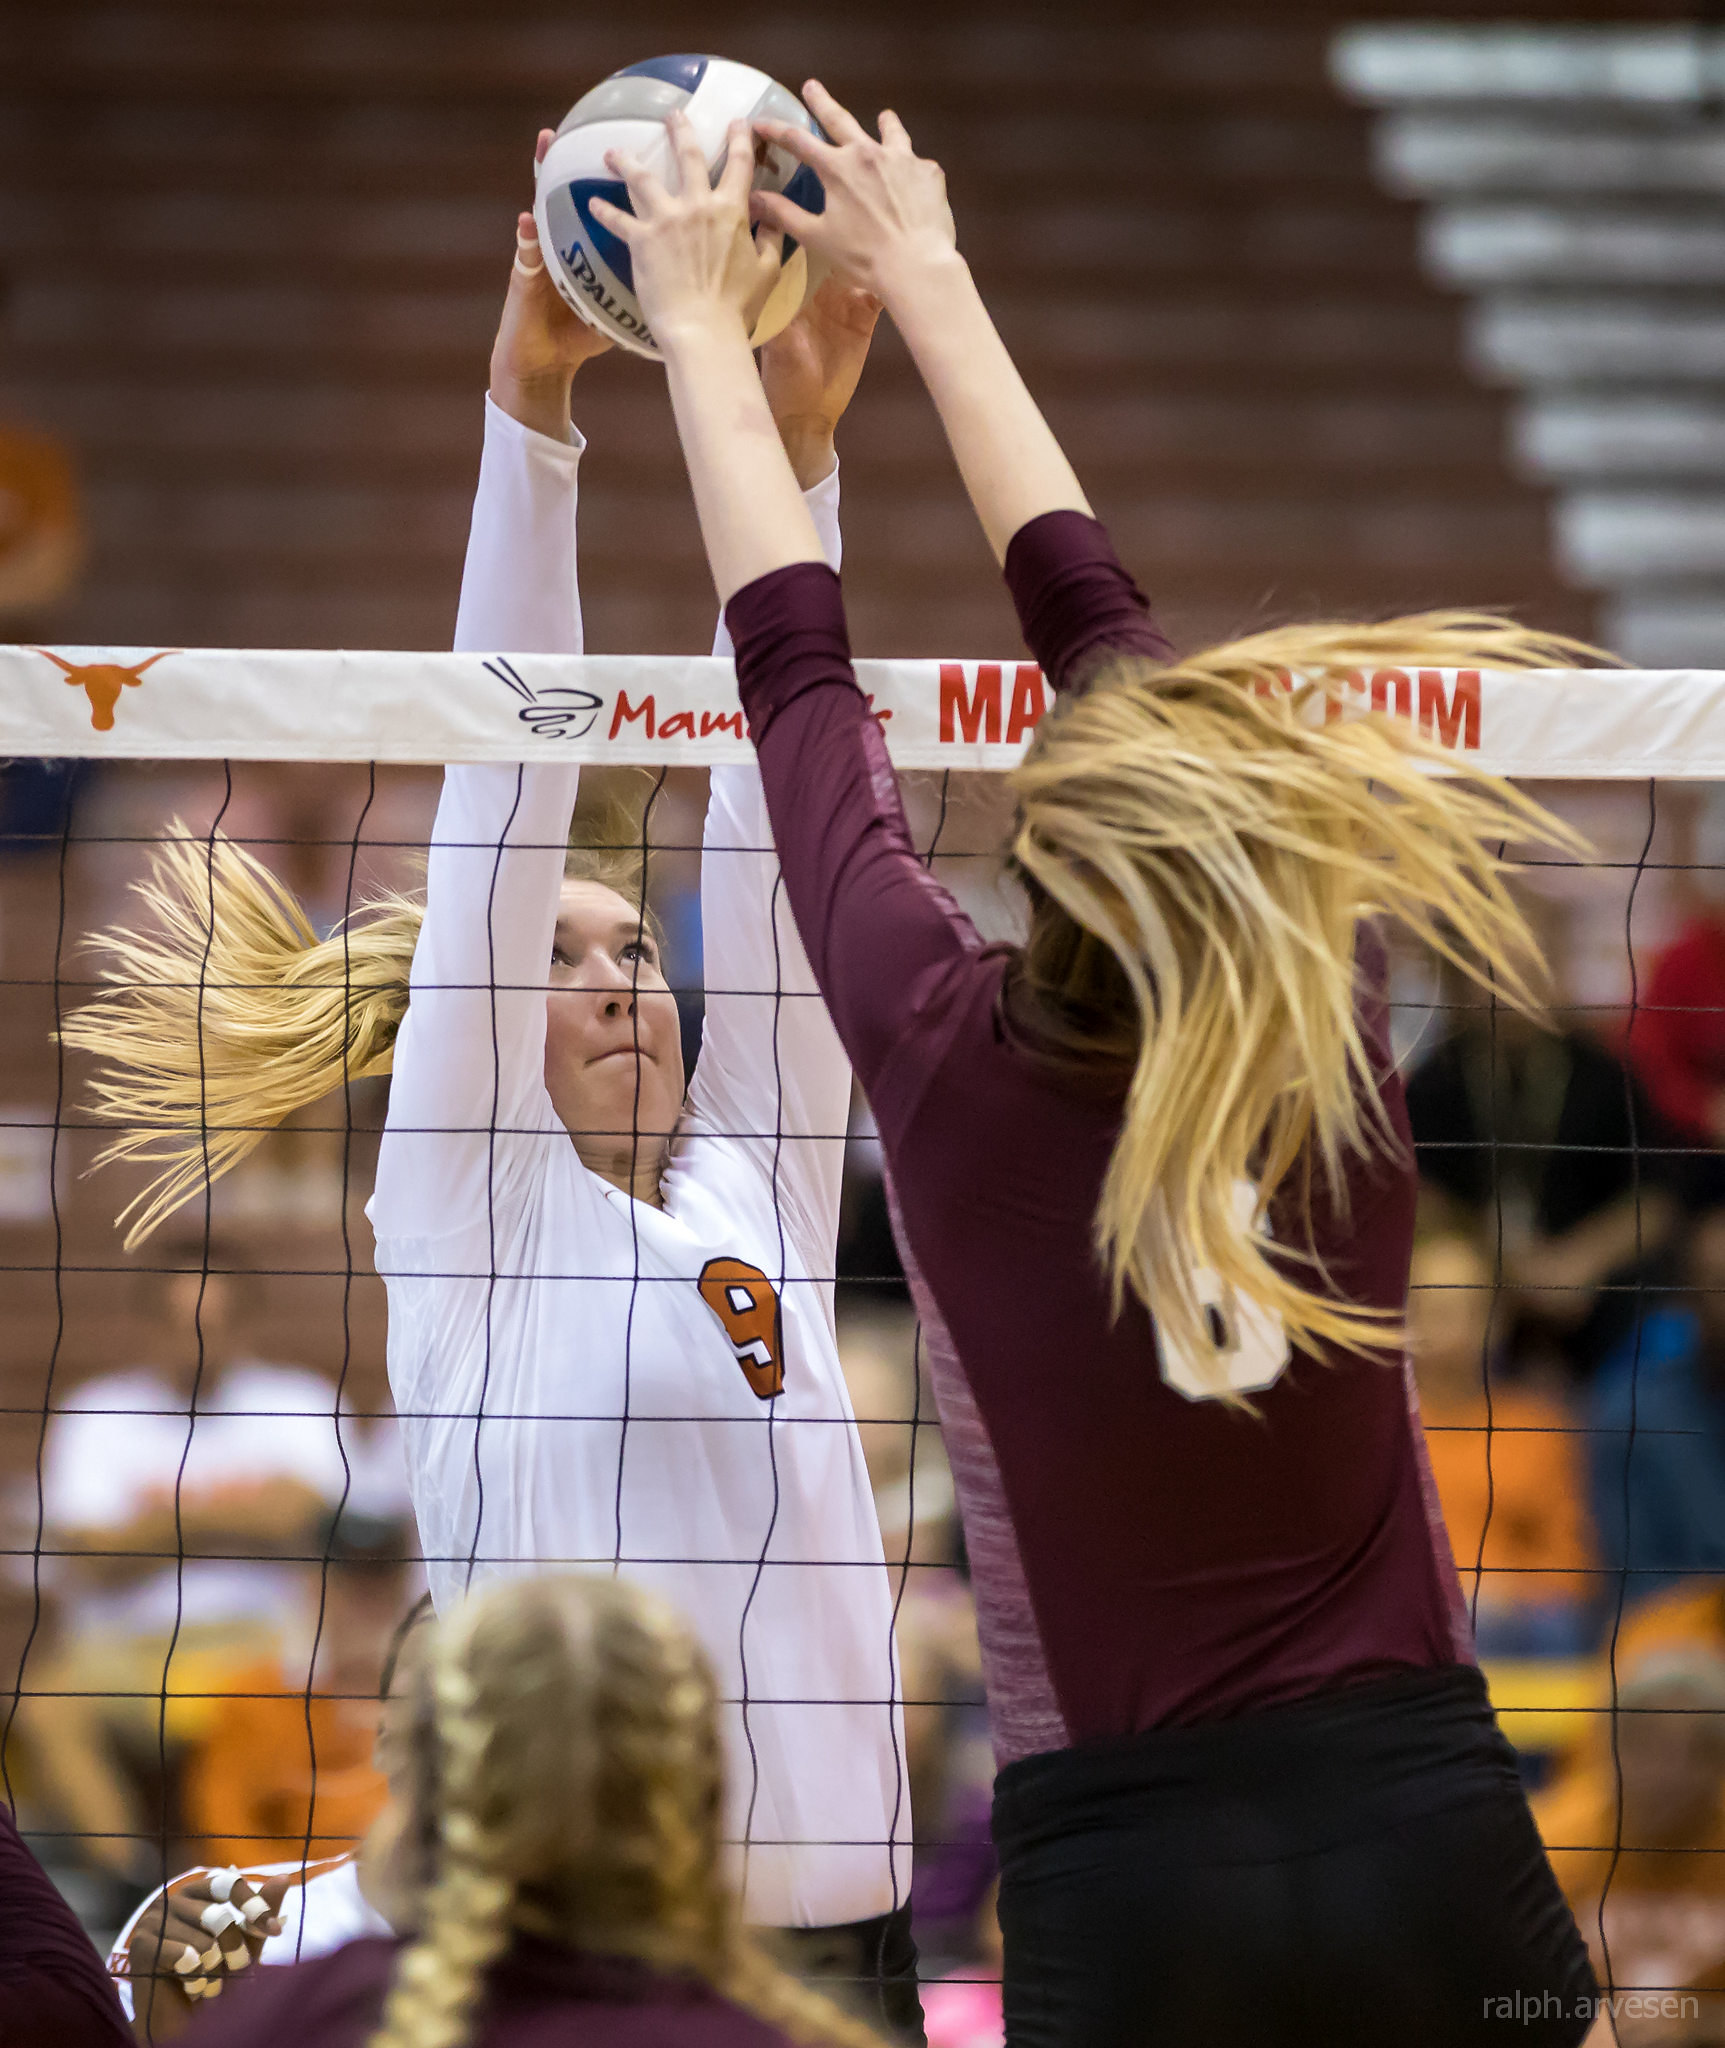 Funny Volleyball Quotes For Hitters That Tip, Dink, Tomahawk And Poke


Volleyball joust Texas block and Texas A&M over the net. Photo by Ralph Aversen.